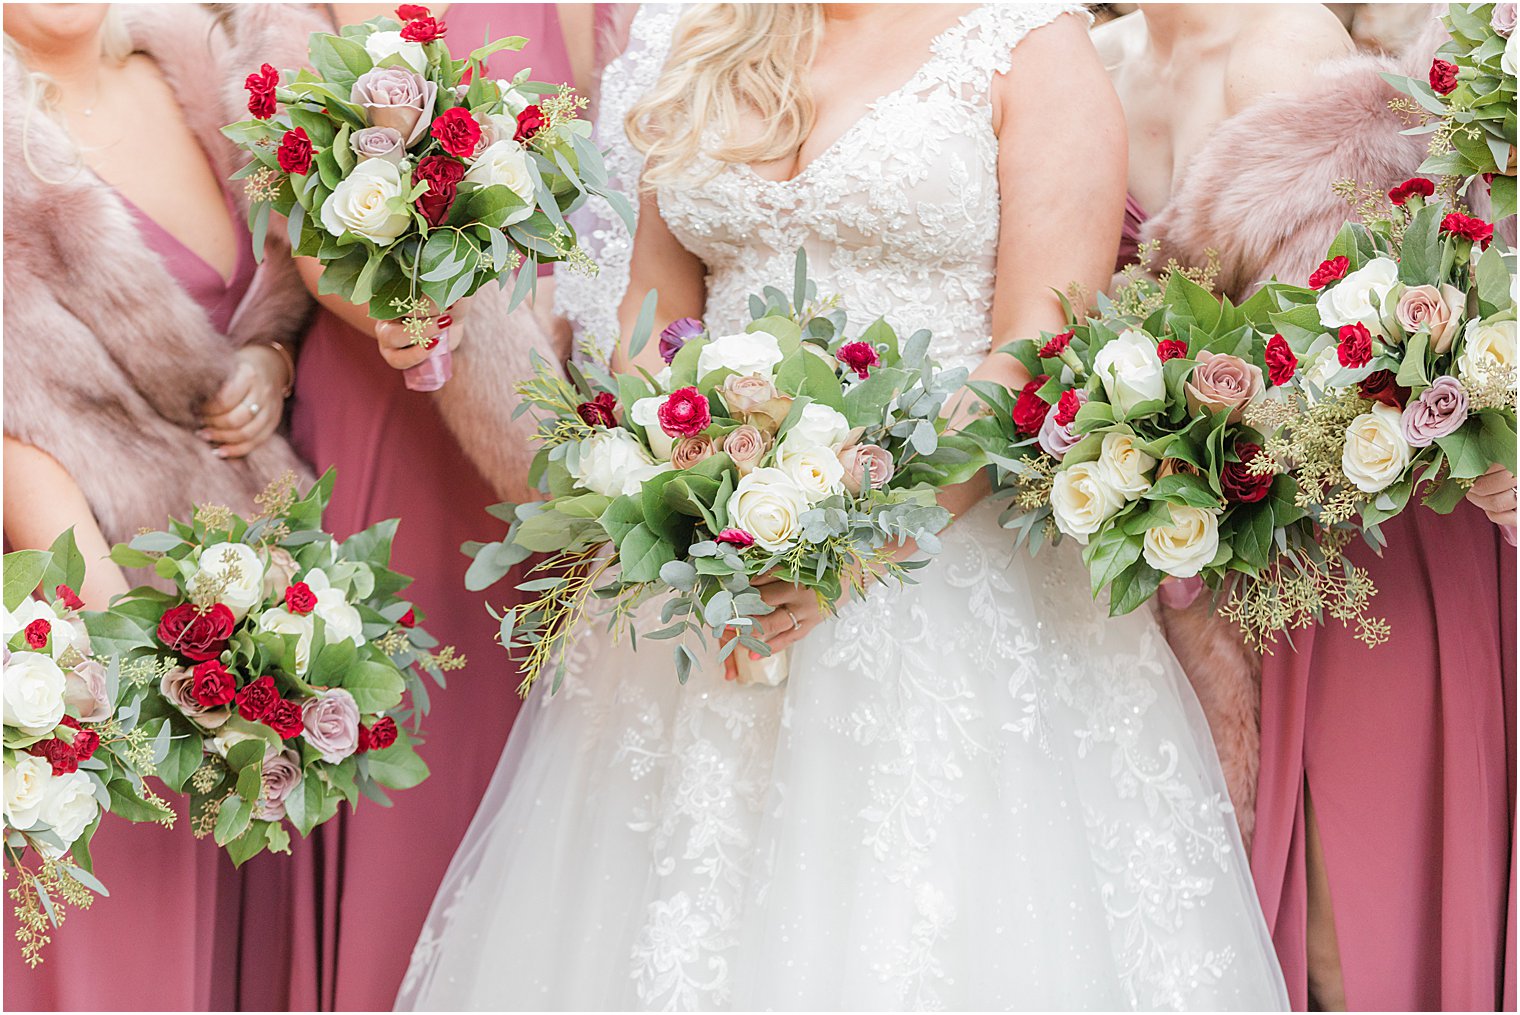 bride and bridesmaids hold bouquets of white and red flowers